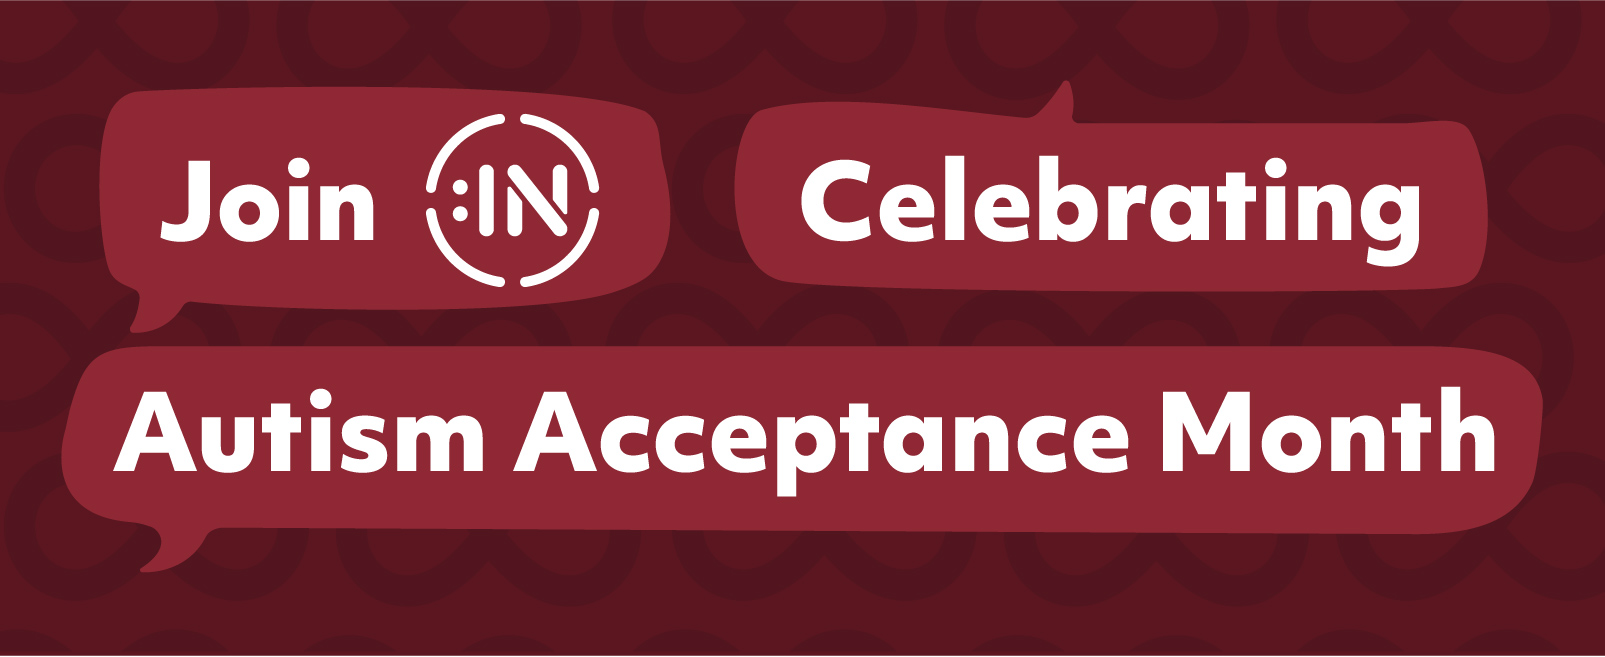 Join IN and Celebrate April as Autism Acceptance Month